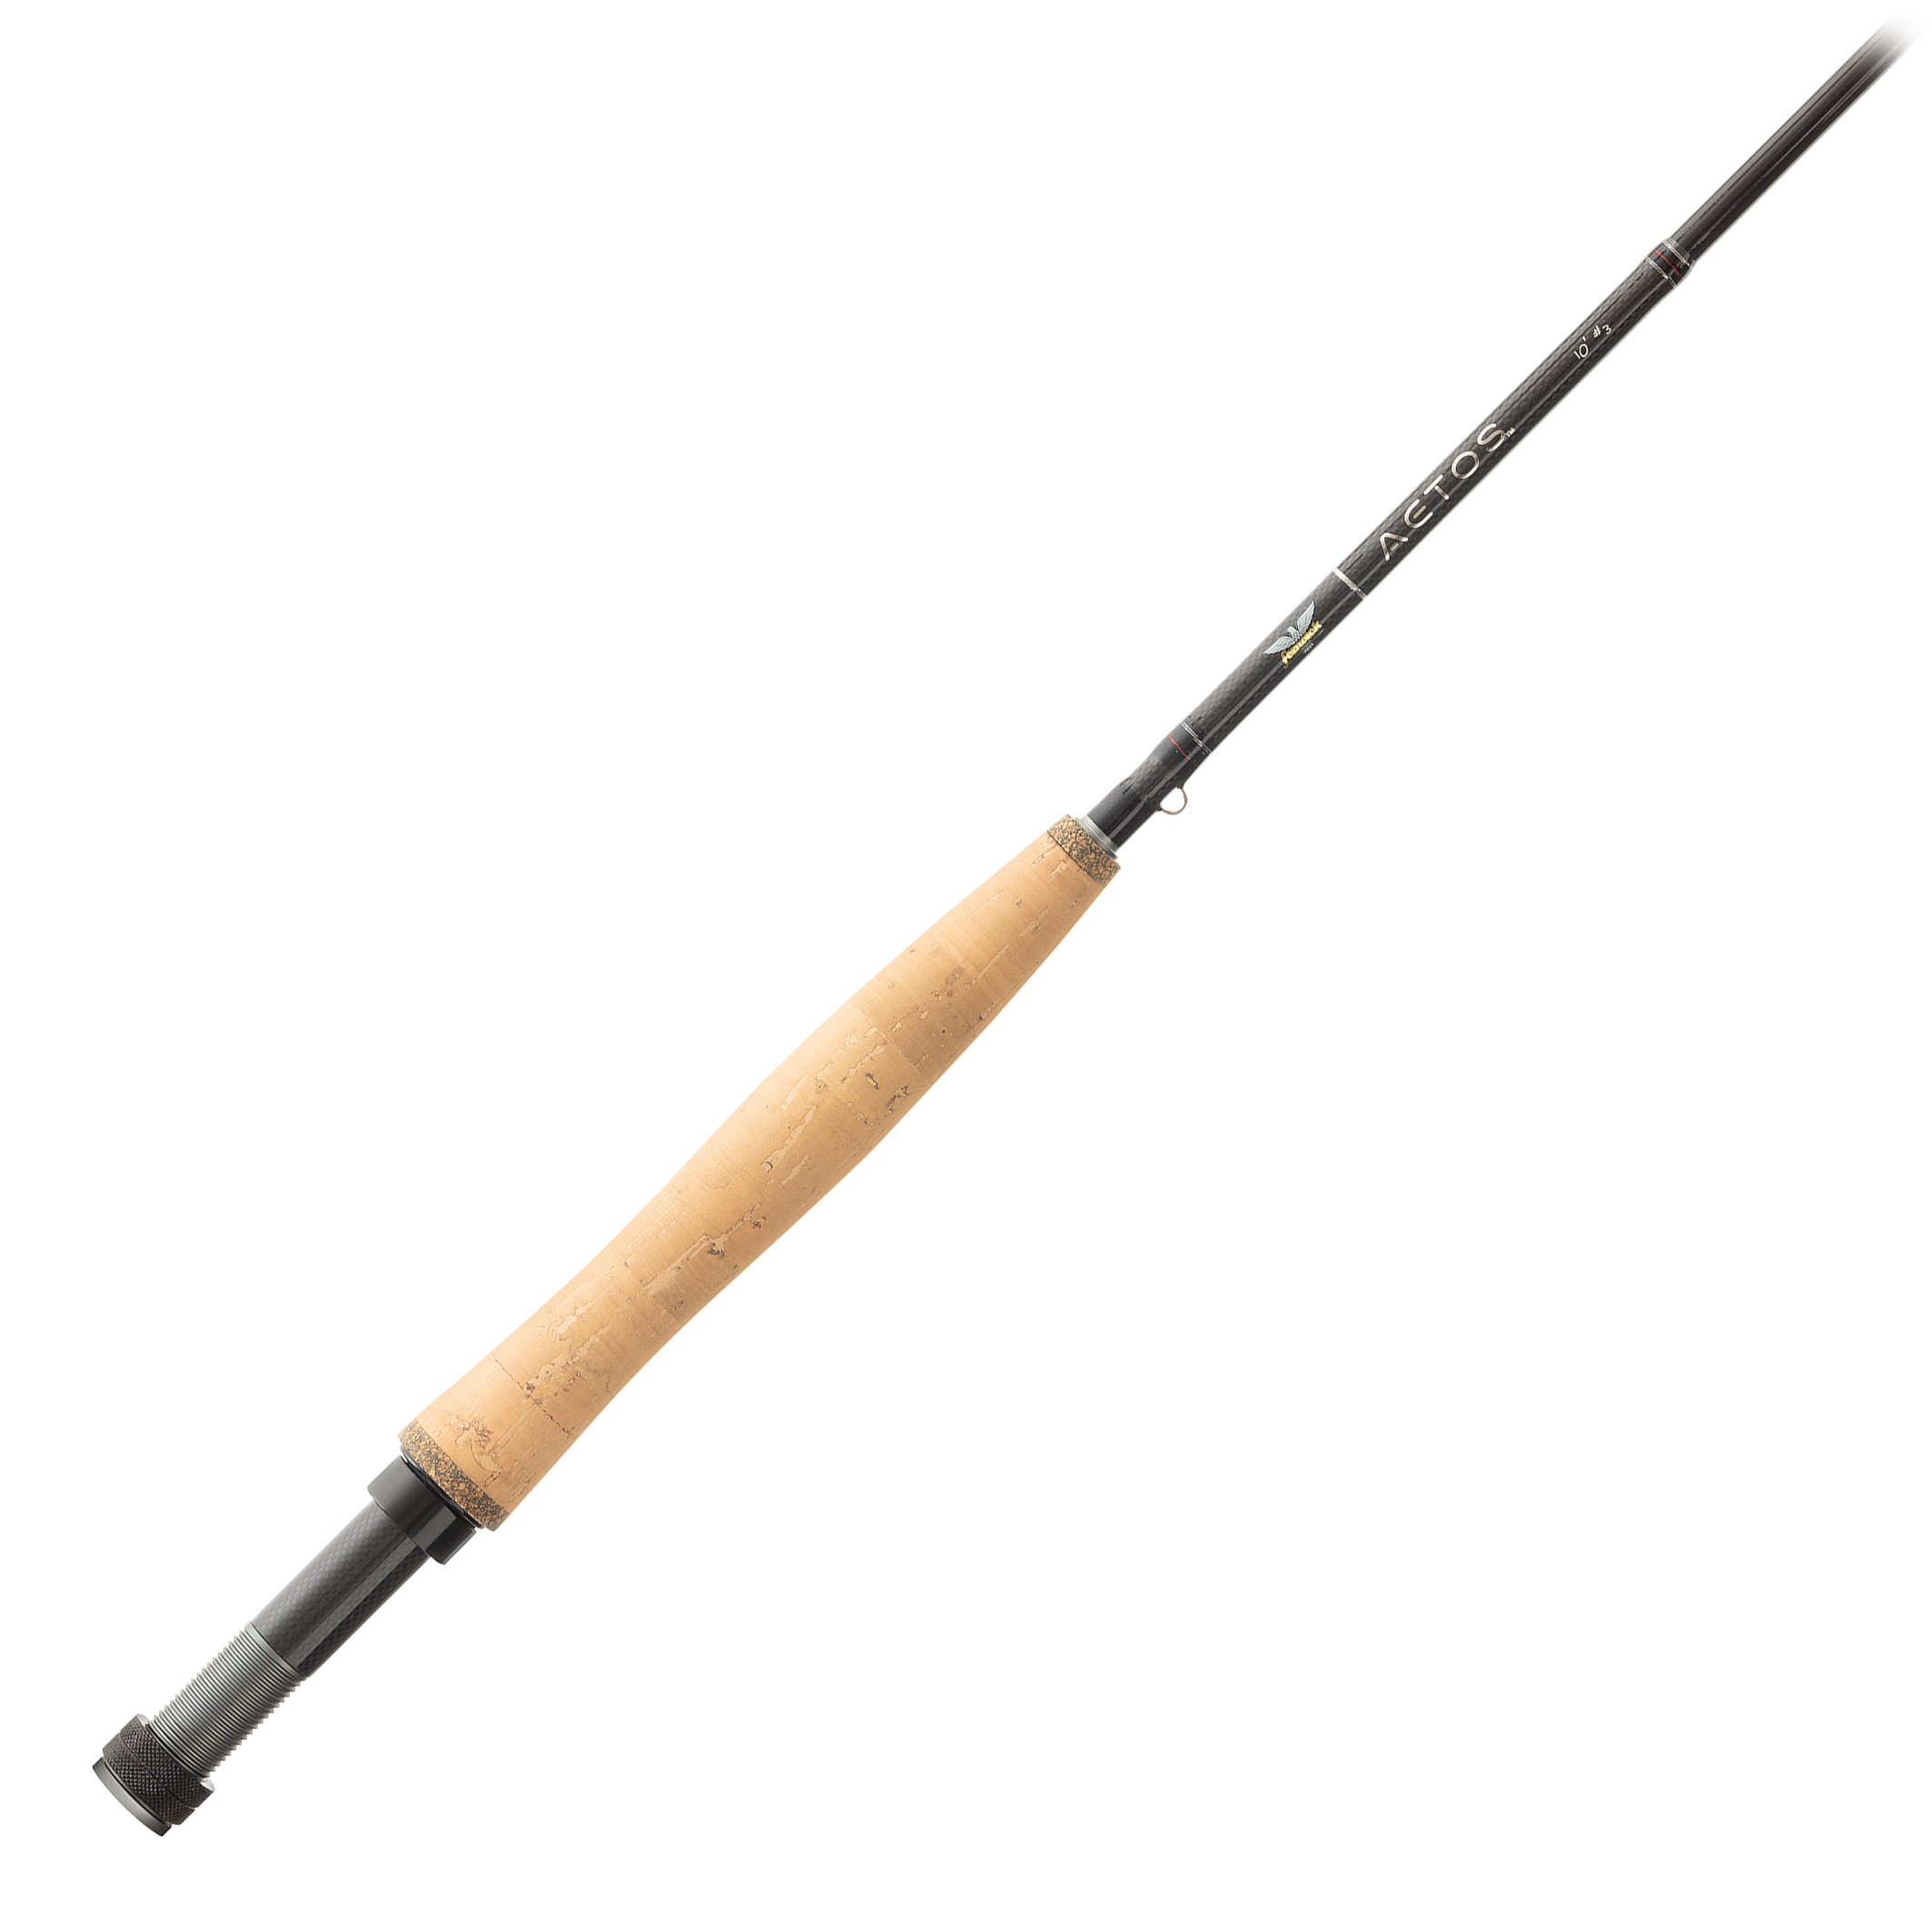 Fenwick Aetos 3wt Fly Rod and Orvis Reel - sporting goods - by